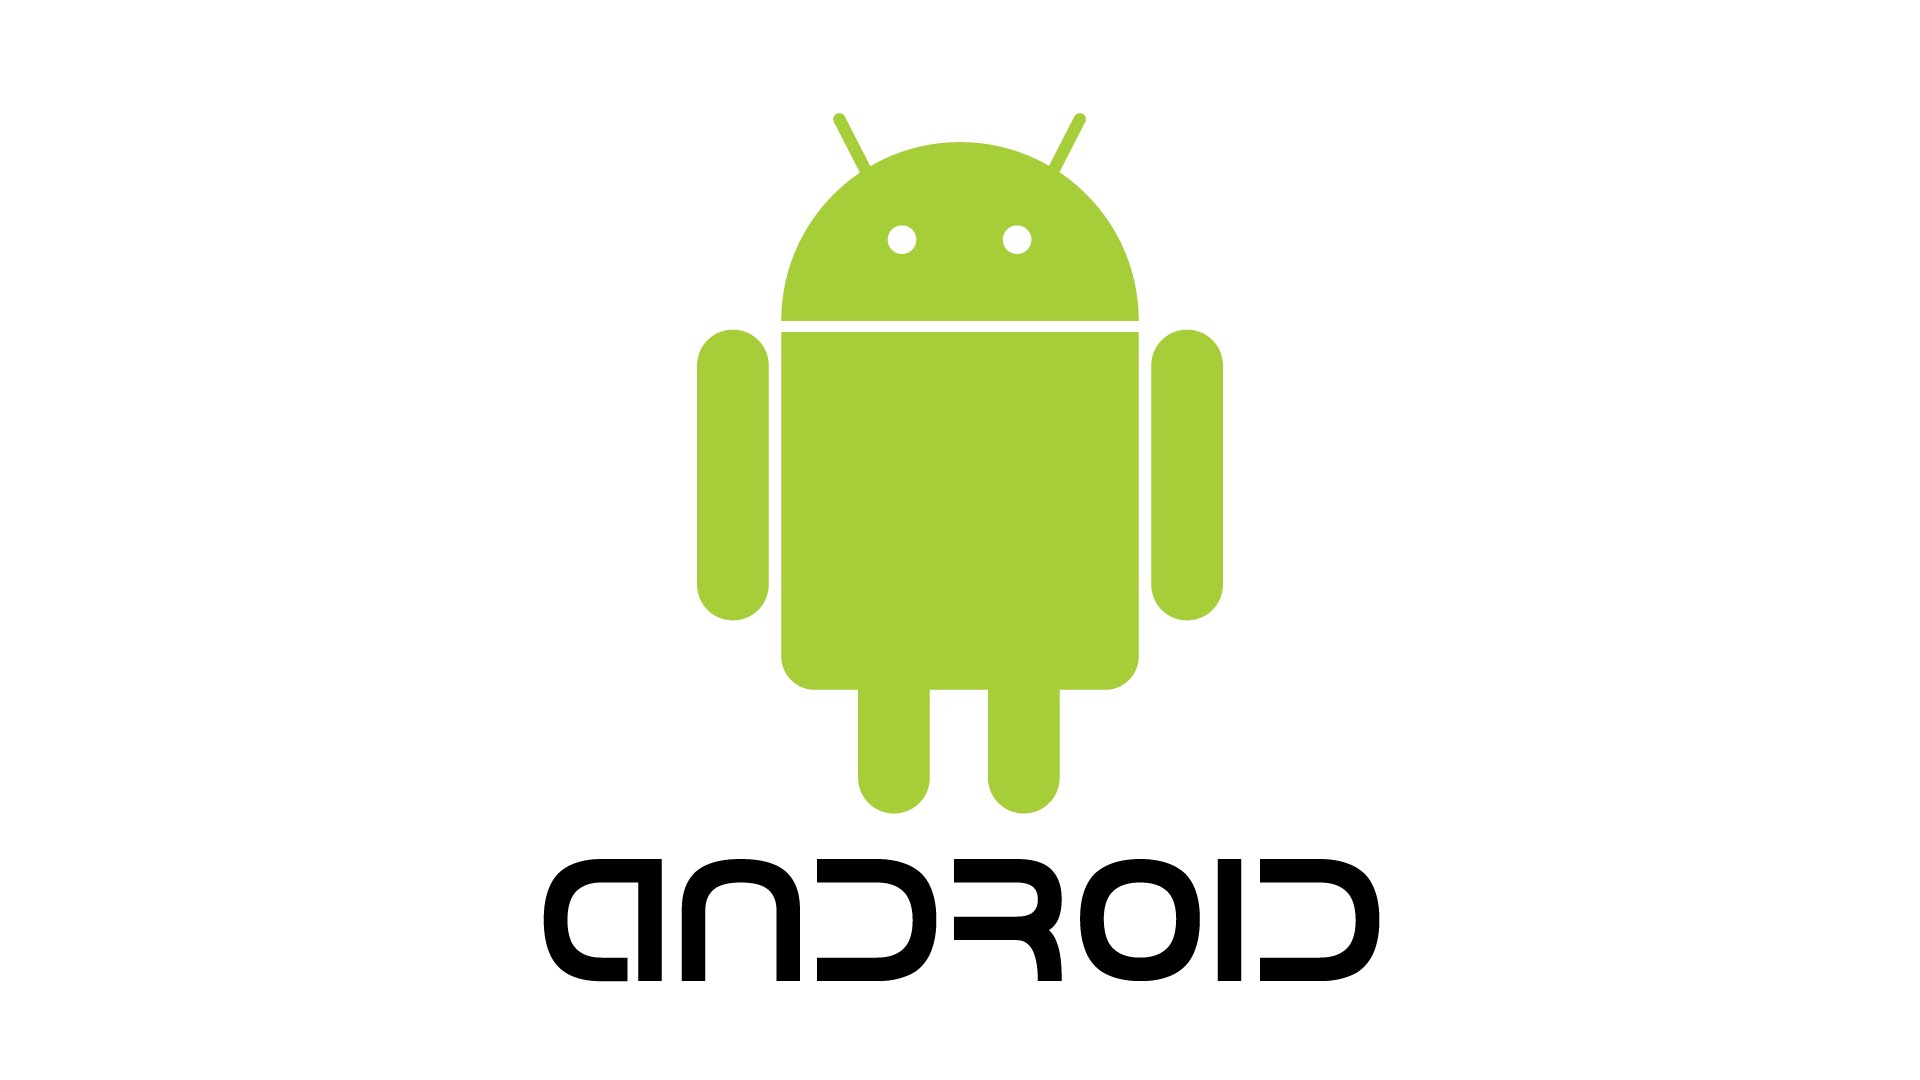 Hire Android Developer – Why and How?